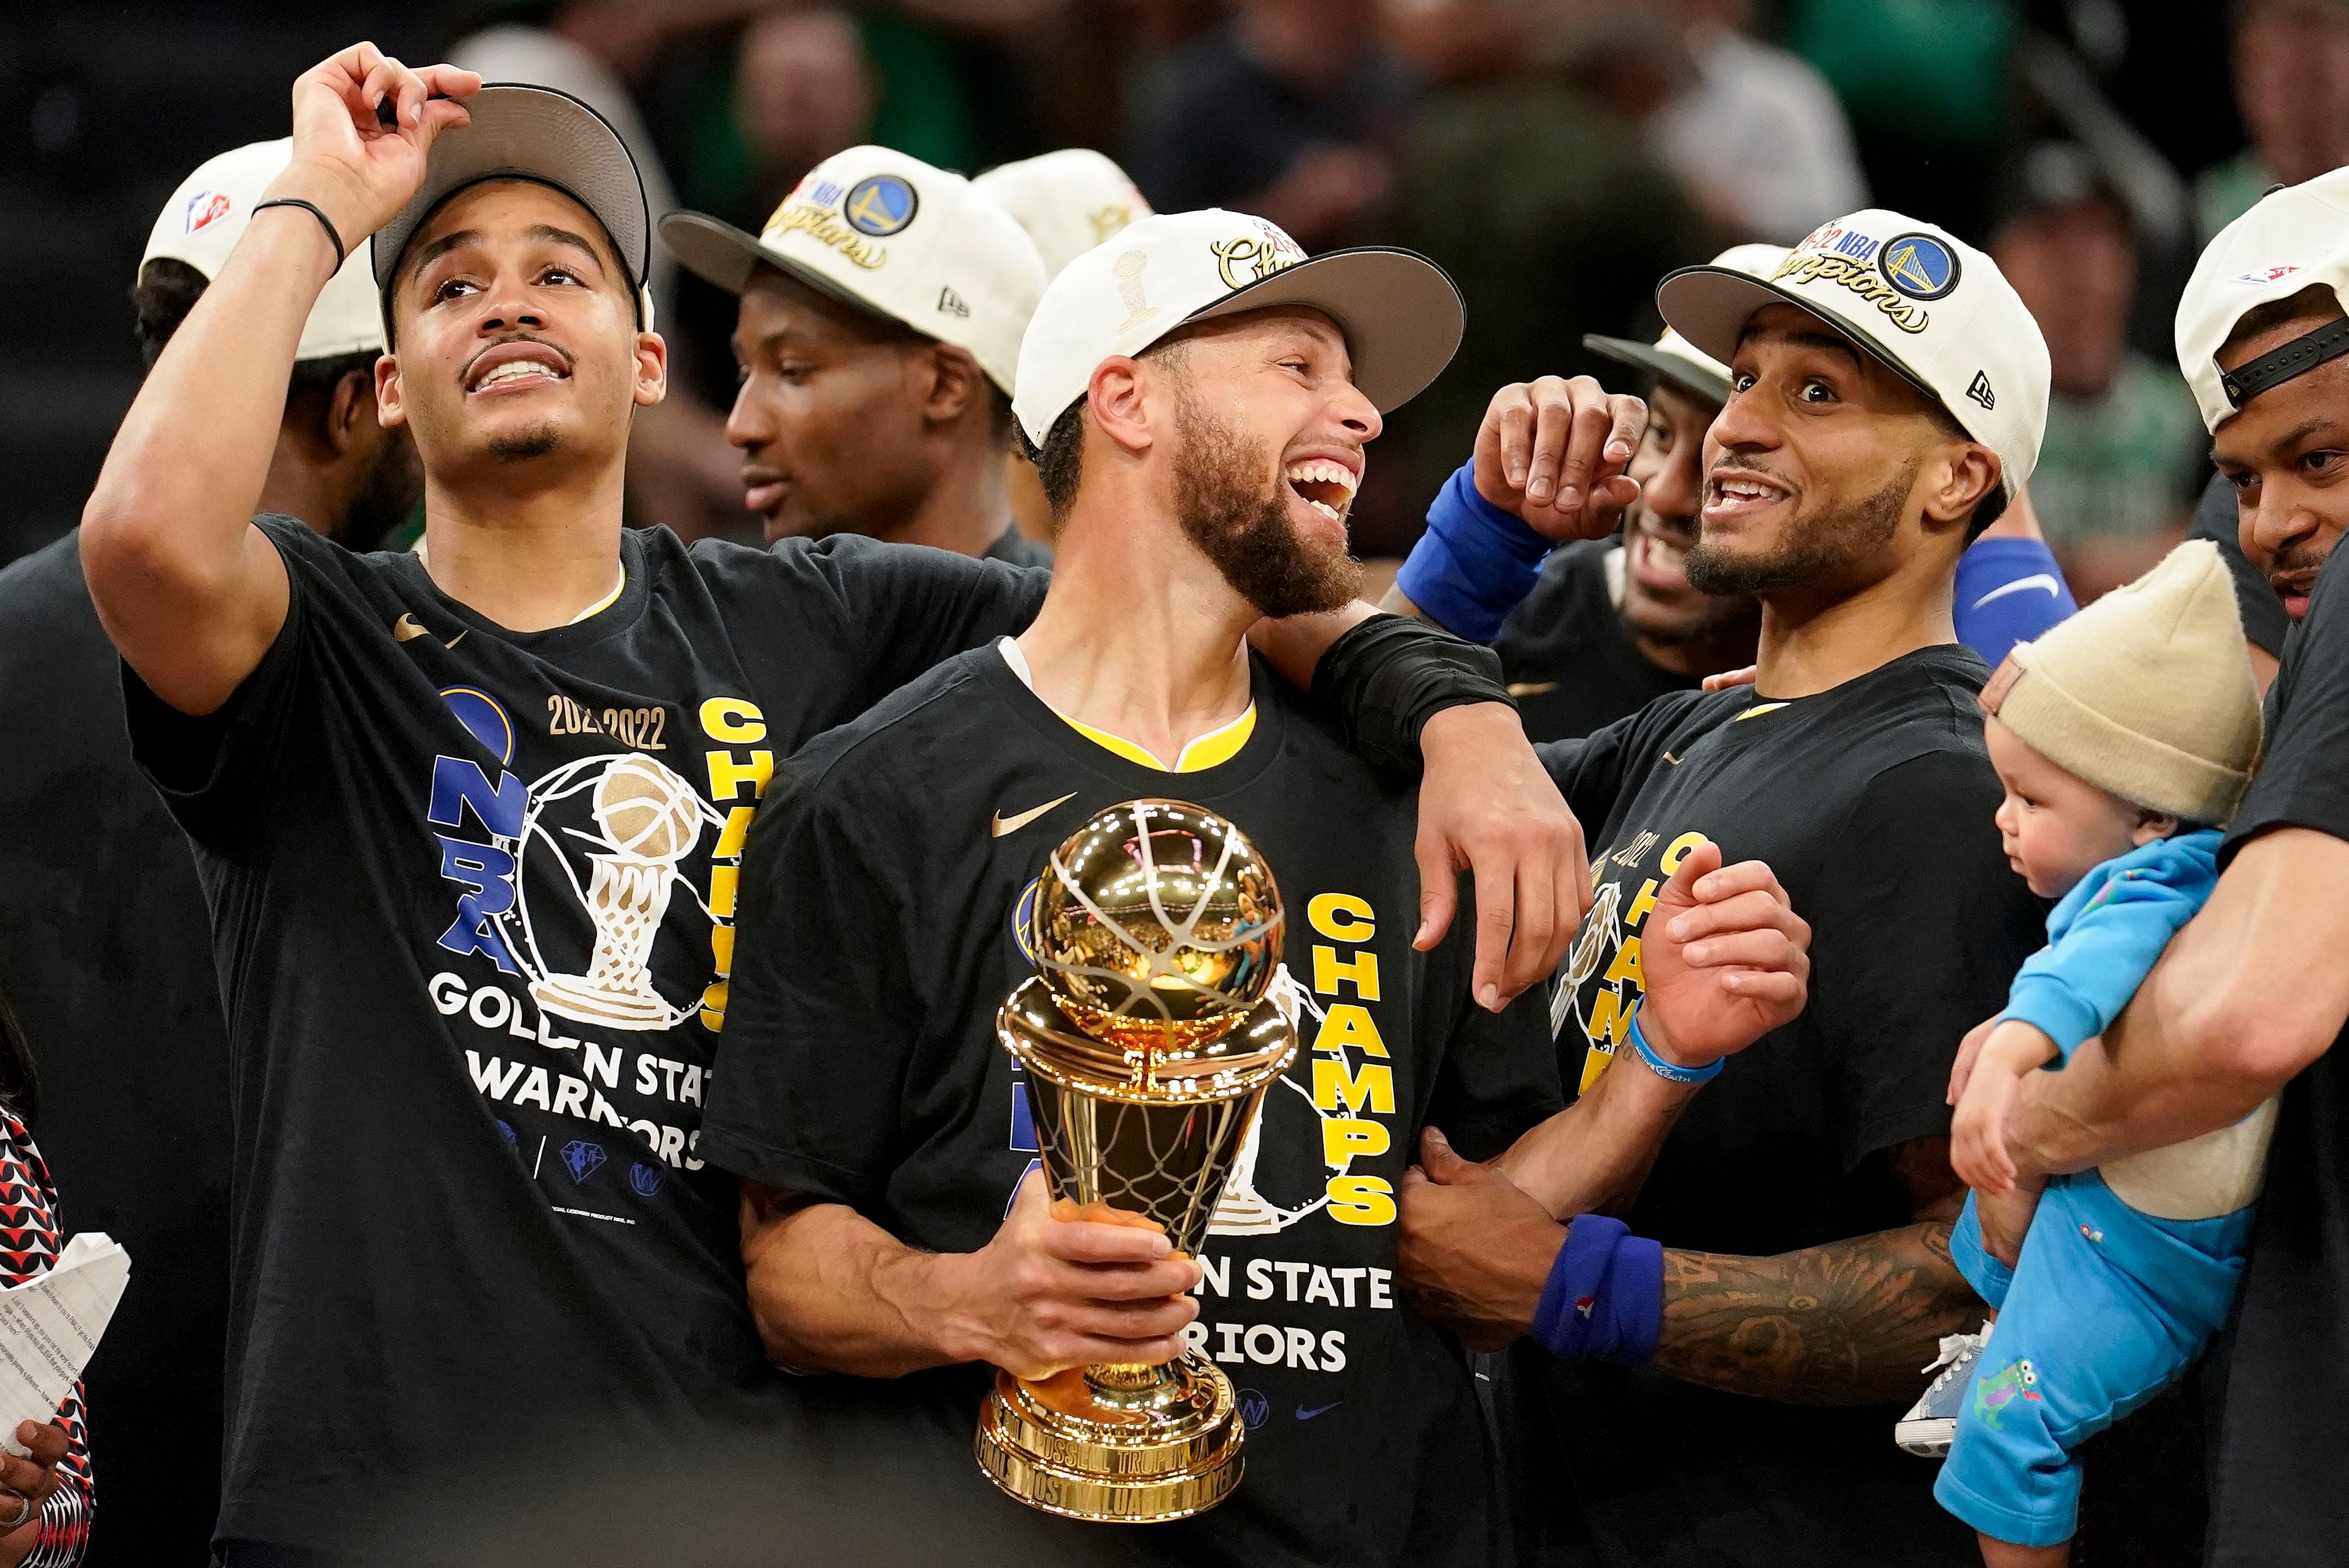 NBA News Today: Golden State Warriors celebrate ring night